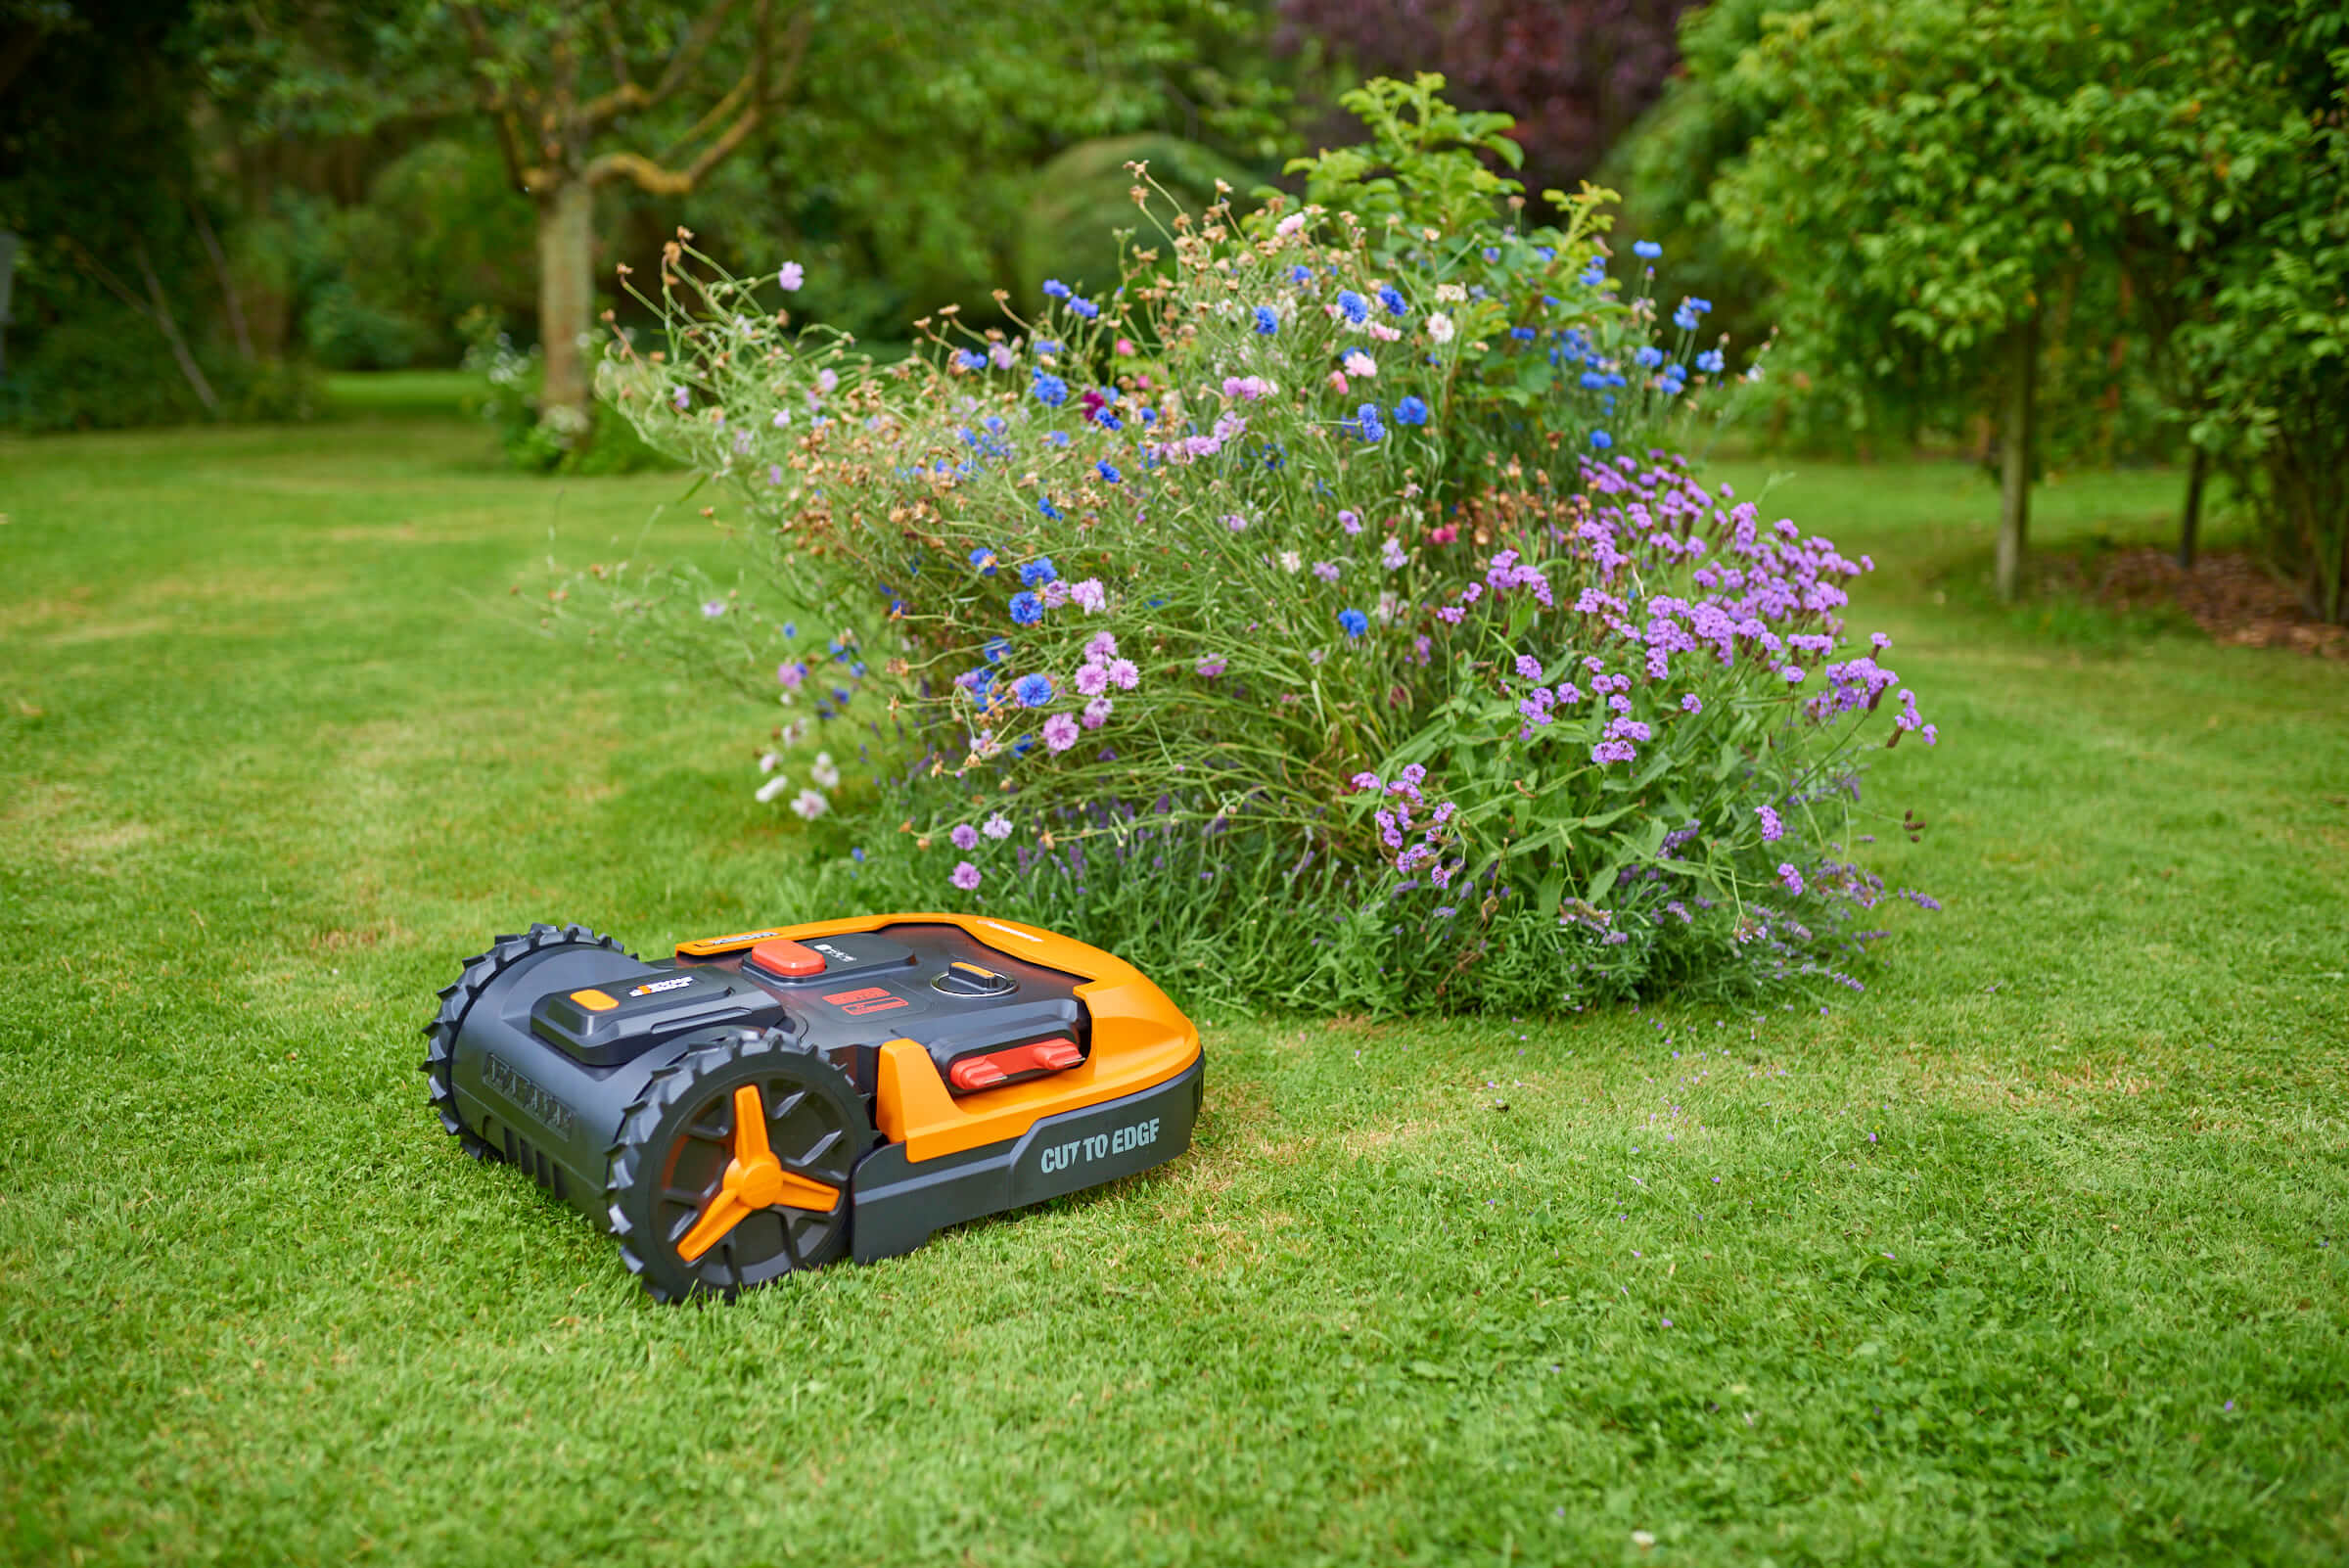 How to Build a Remote Control Lawn Mower